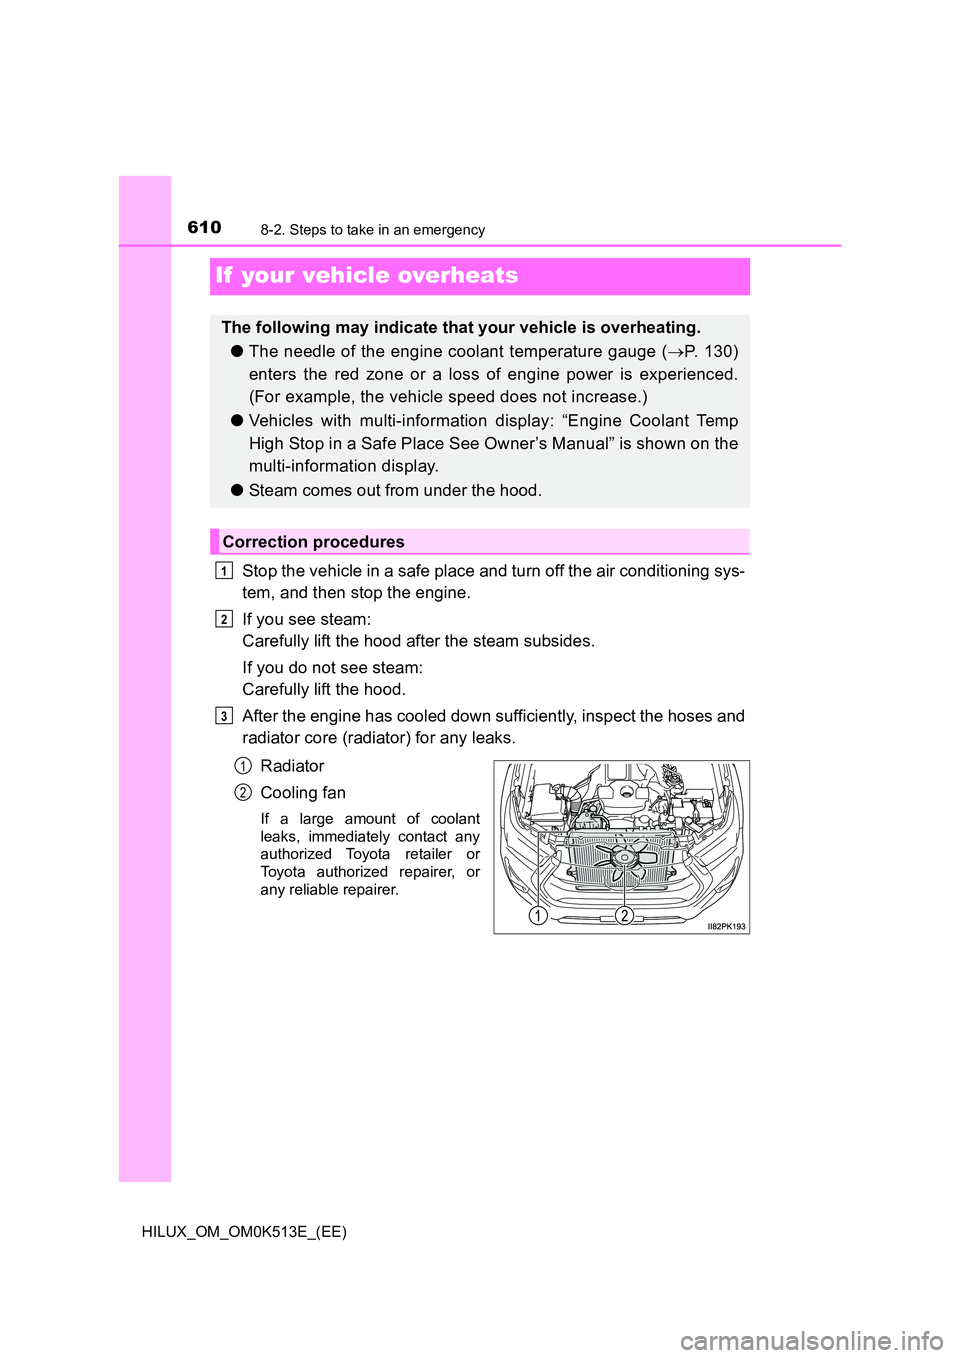 TOYOTA HILUX 2021  Owners Manual (in English) 6108-2. Steps to take in an emergency
HILUX_OM_OM0K513E_(EE)
If  your vehicle overheats
Stop the vehicle in a safe place and turn off the air conditioning sys- 
tem, and then stop the engine. 
If you 